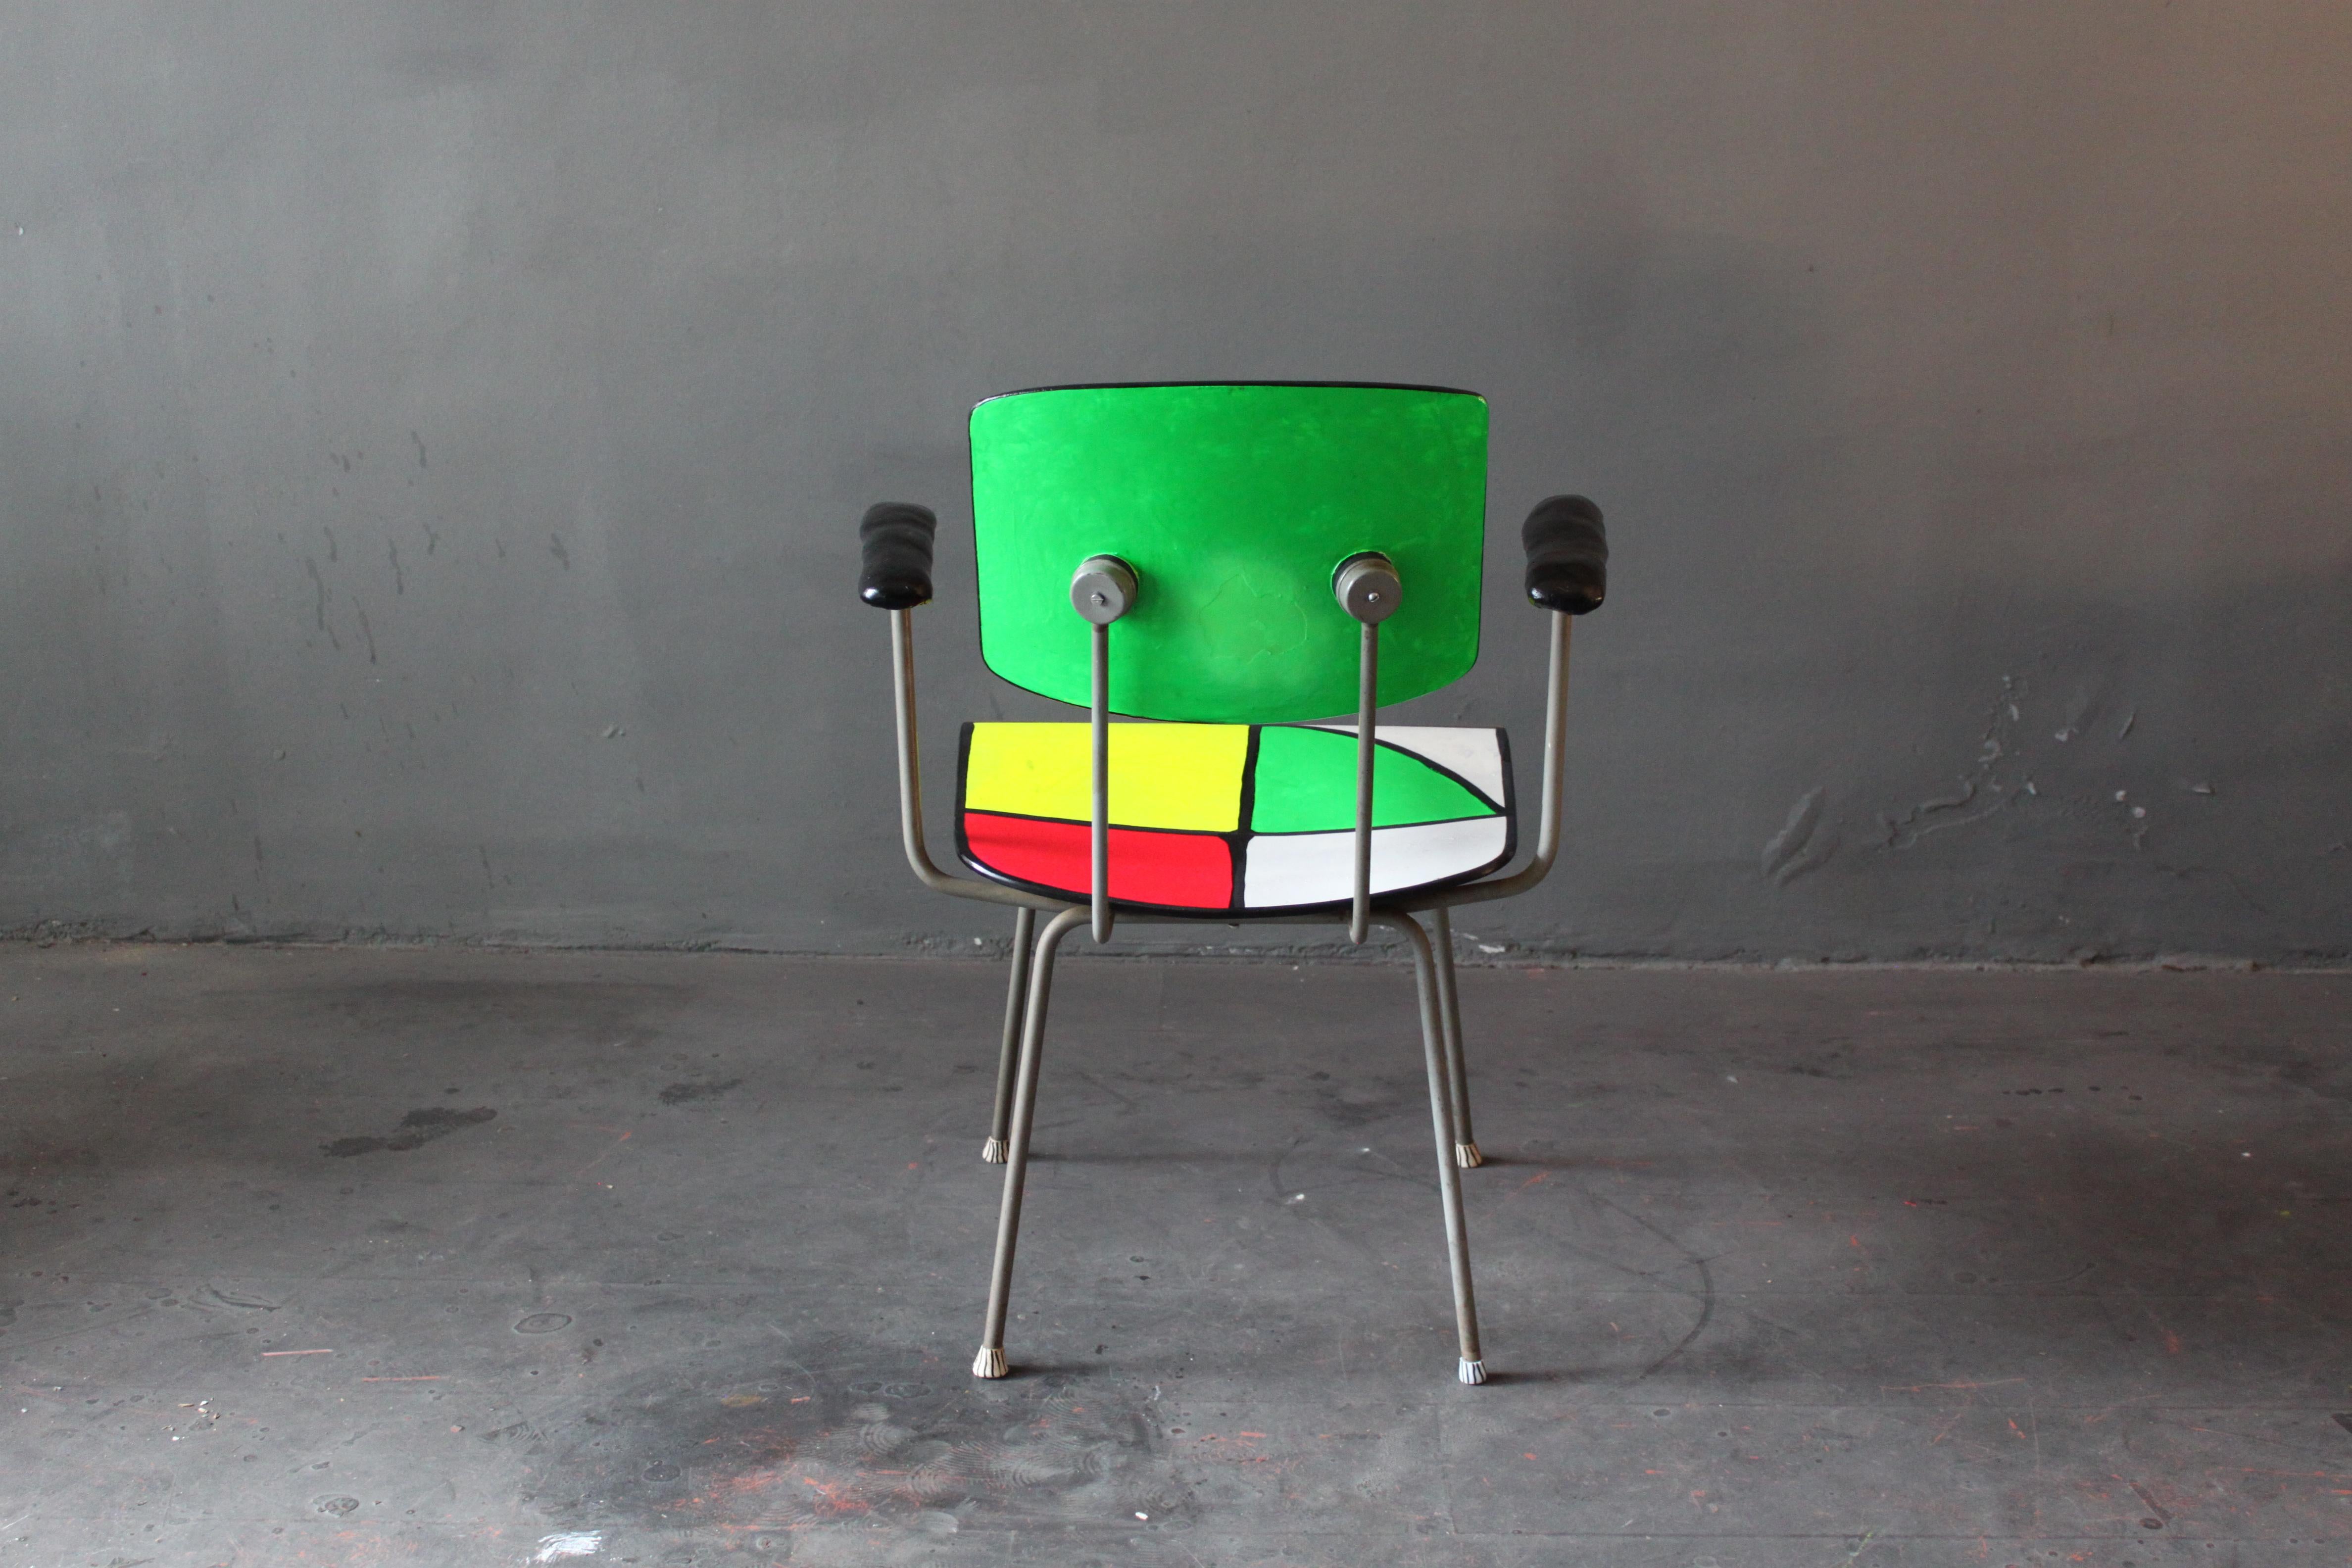 Model 216 armchair by Wim Rietveld for Gispen 1953, contemporized. Re-shaped to avoid its Industrial fabrication and make it a Singleton, hand painted in blue, green, yellow and red neon colors, kneaded black armrests and finished with high gloss 2K